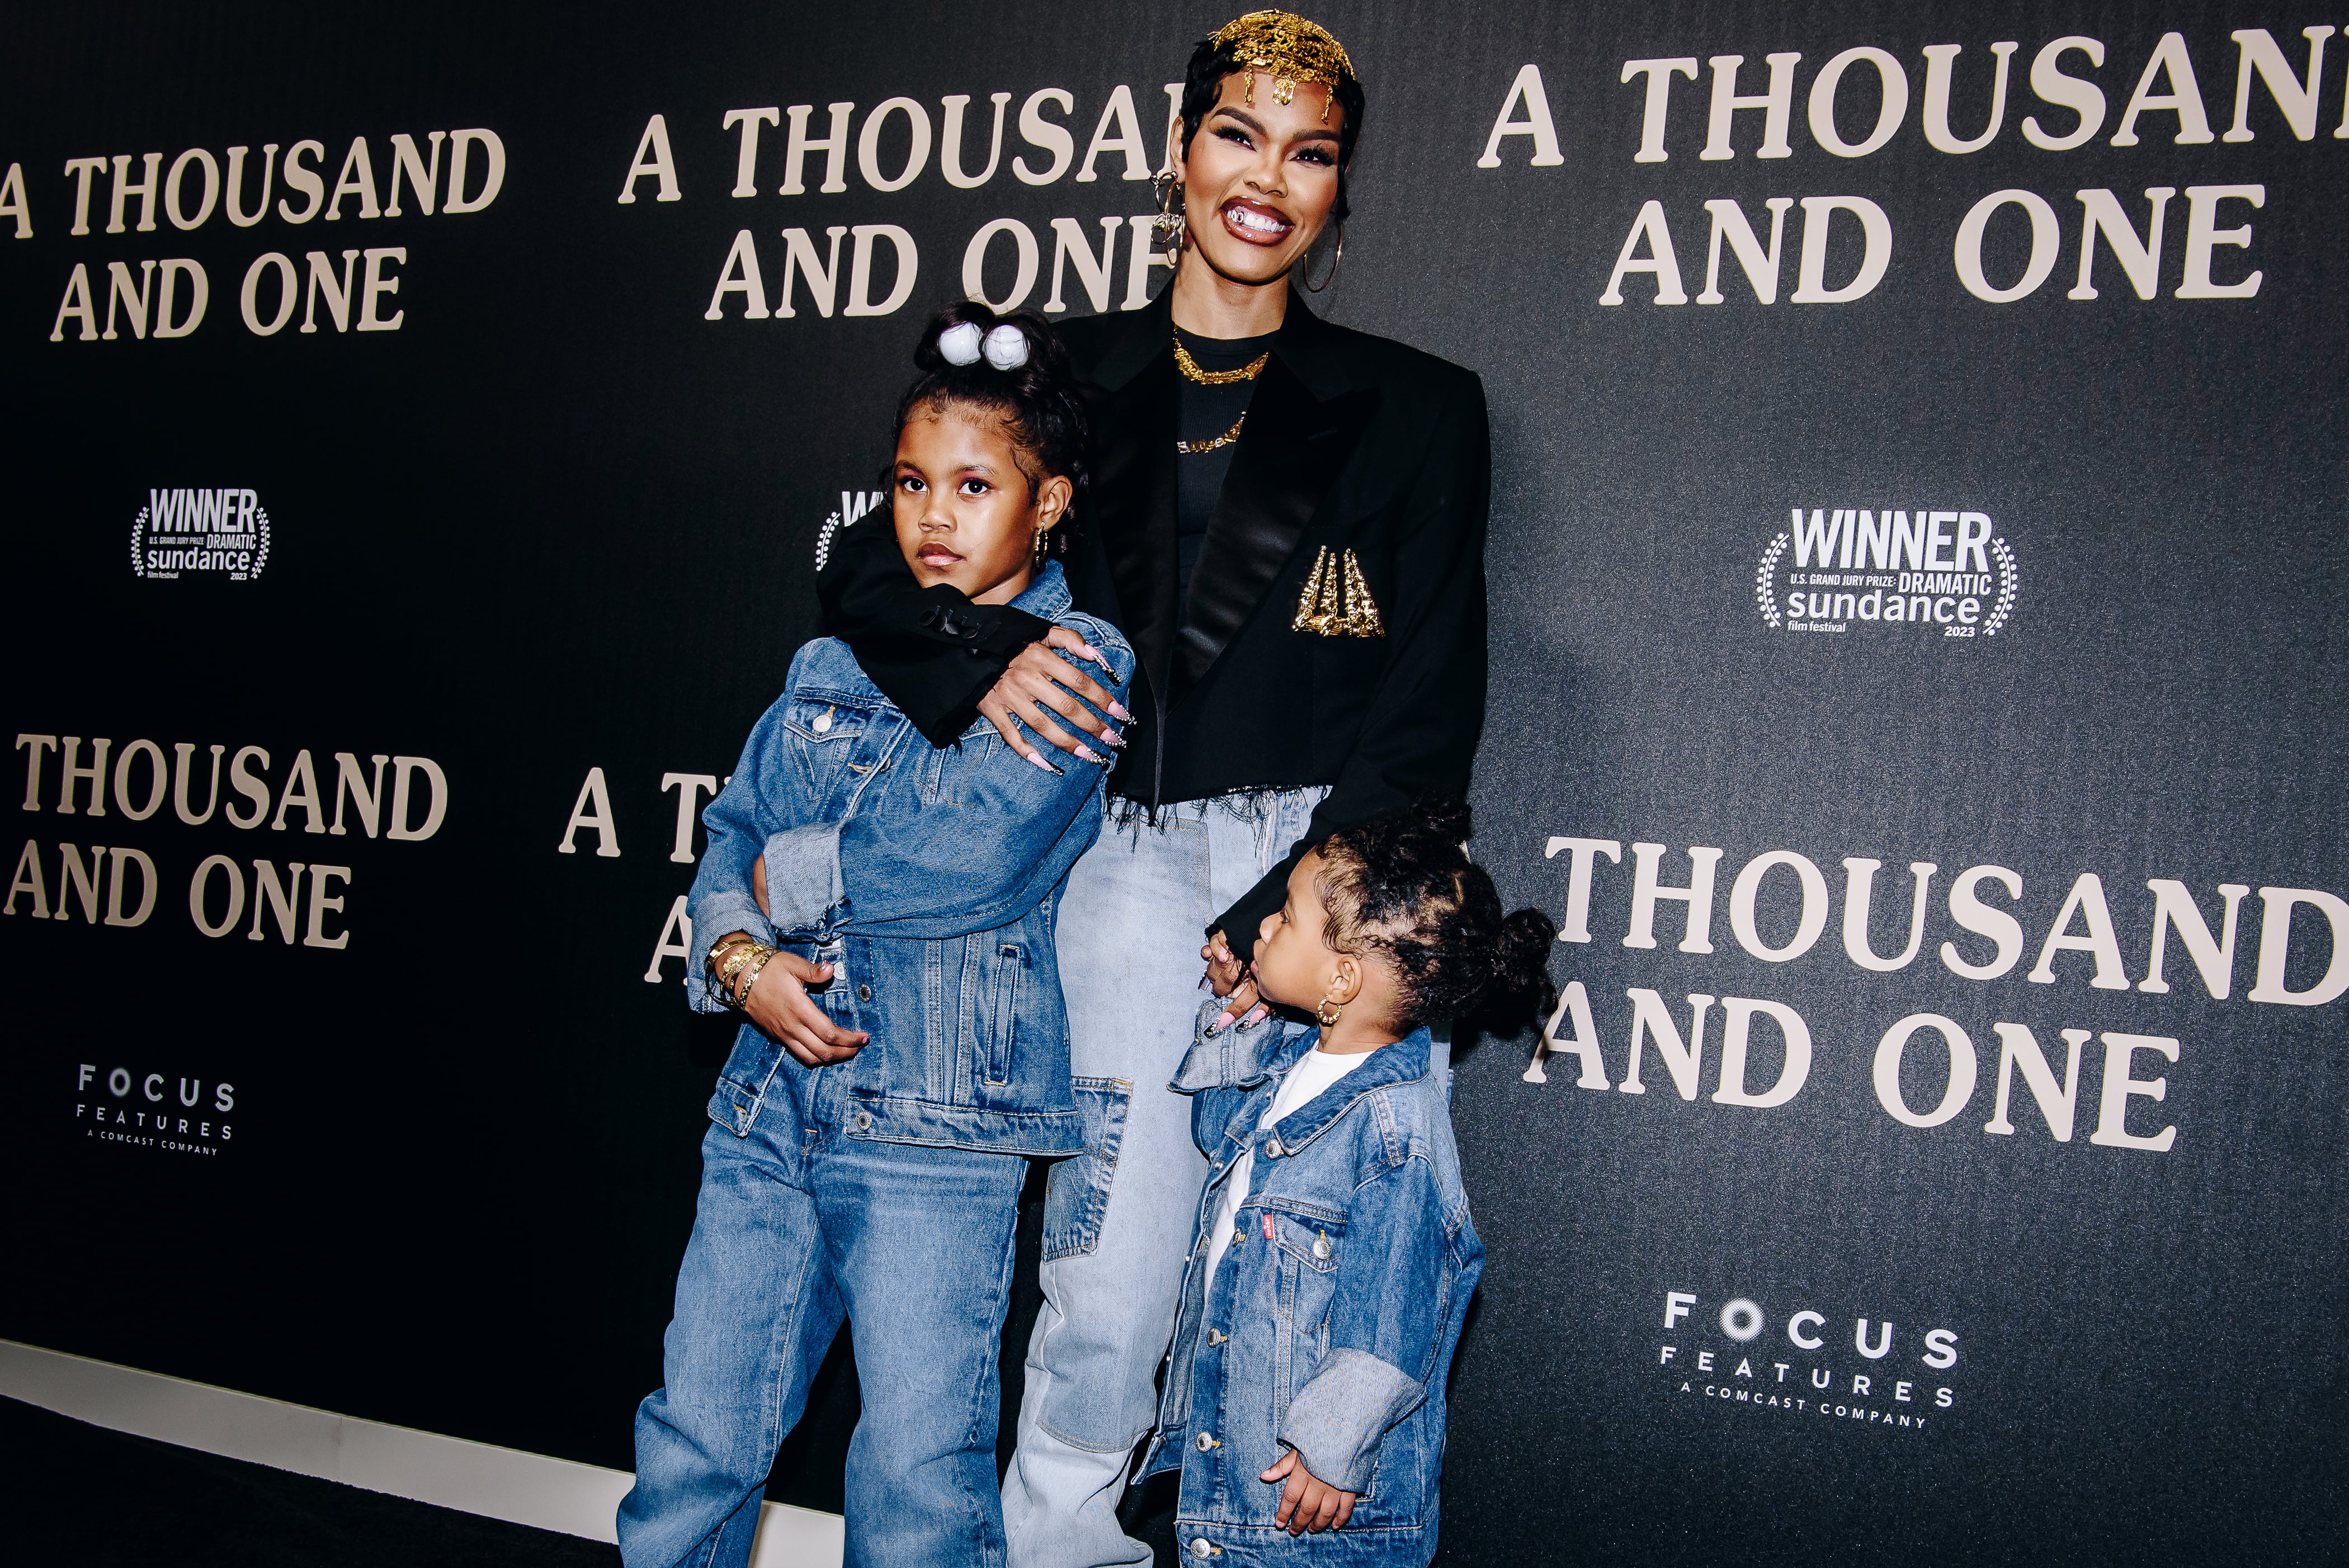 Teyana Taylor and Her Kids at A Thousand and One Premiere